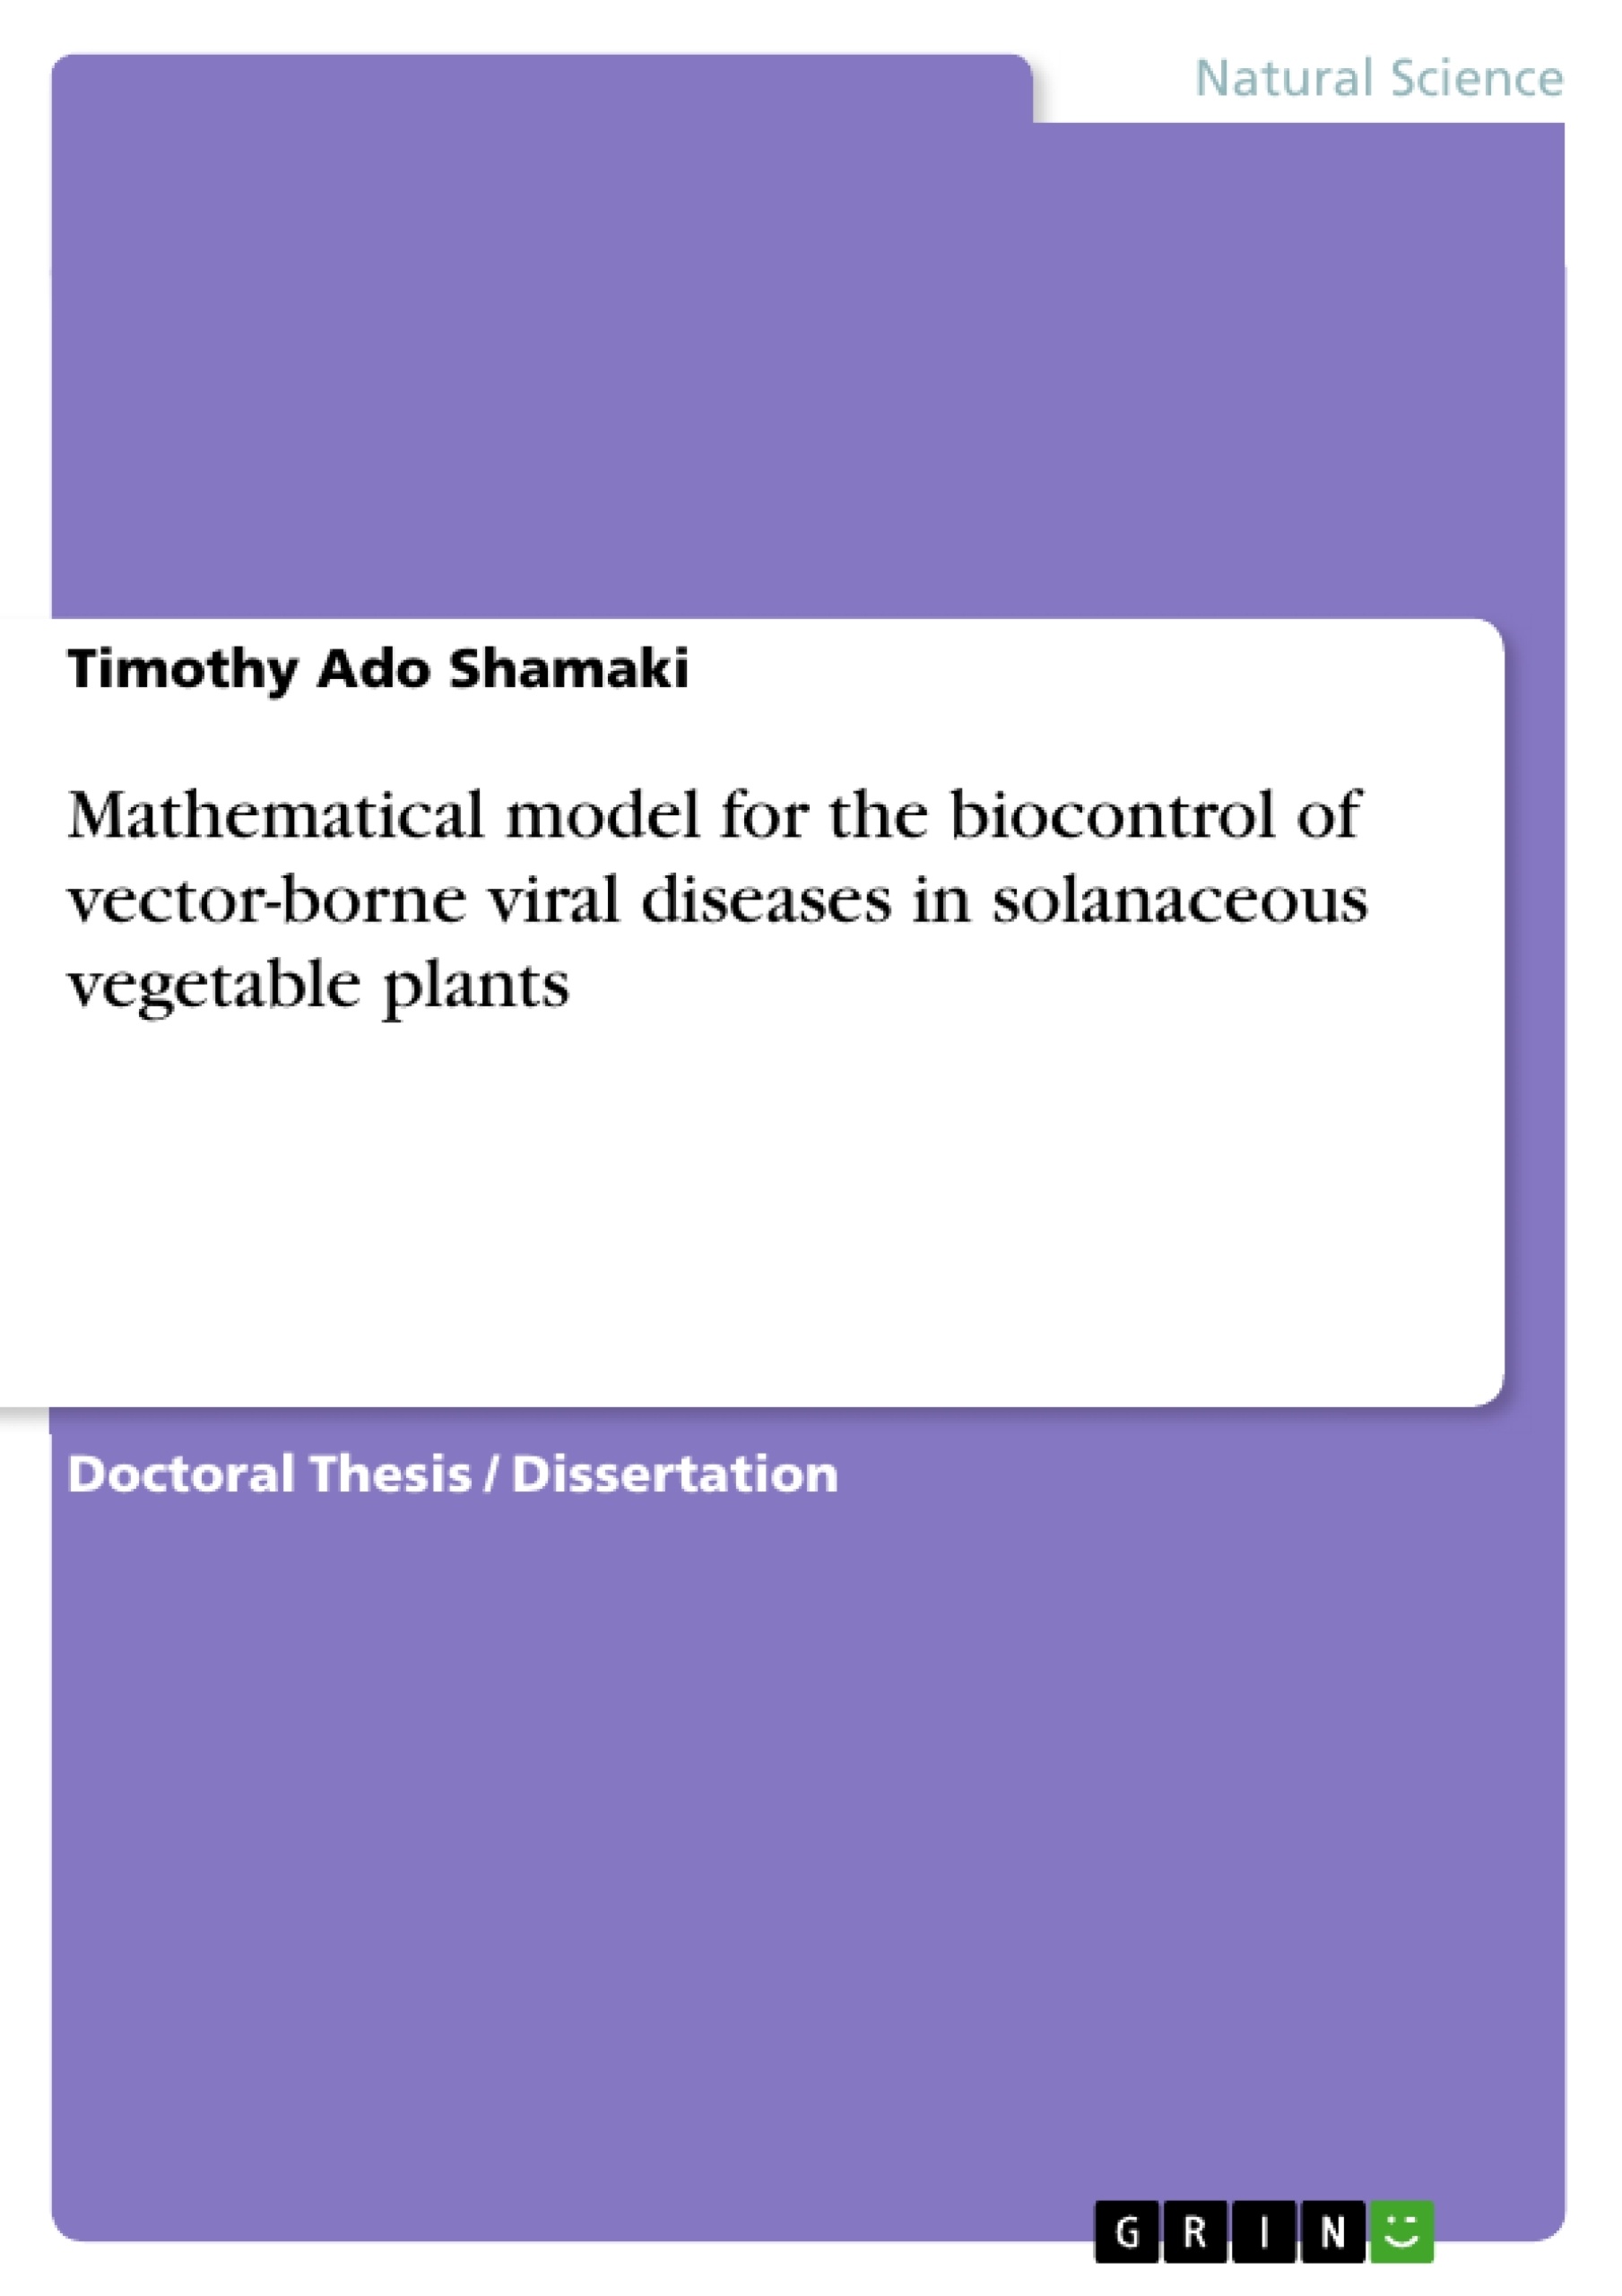 Title: Mathematical model for the biocontrol of vector-borne viral diseases in solanaceous vegetable plants